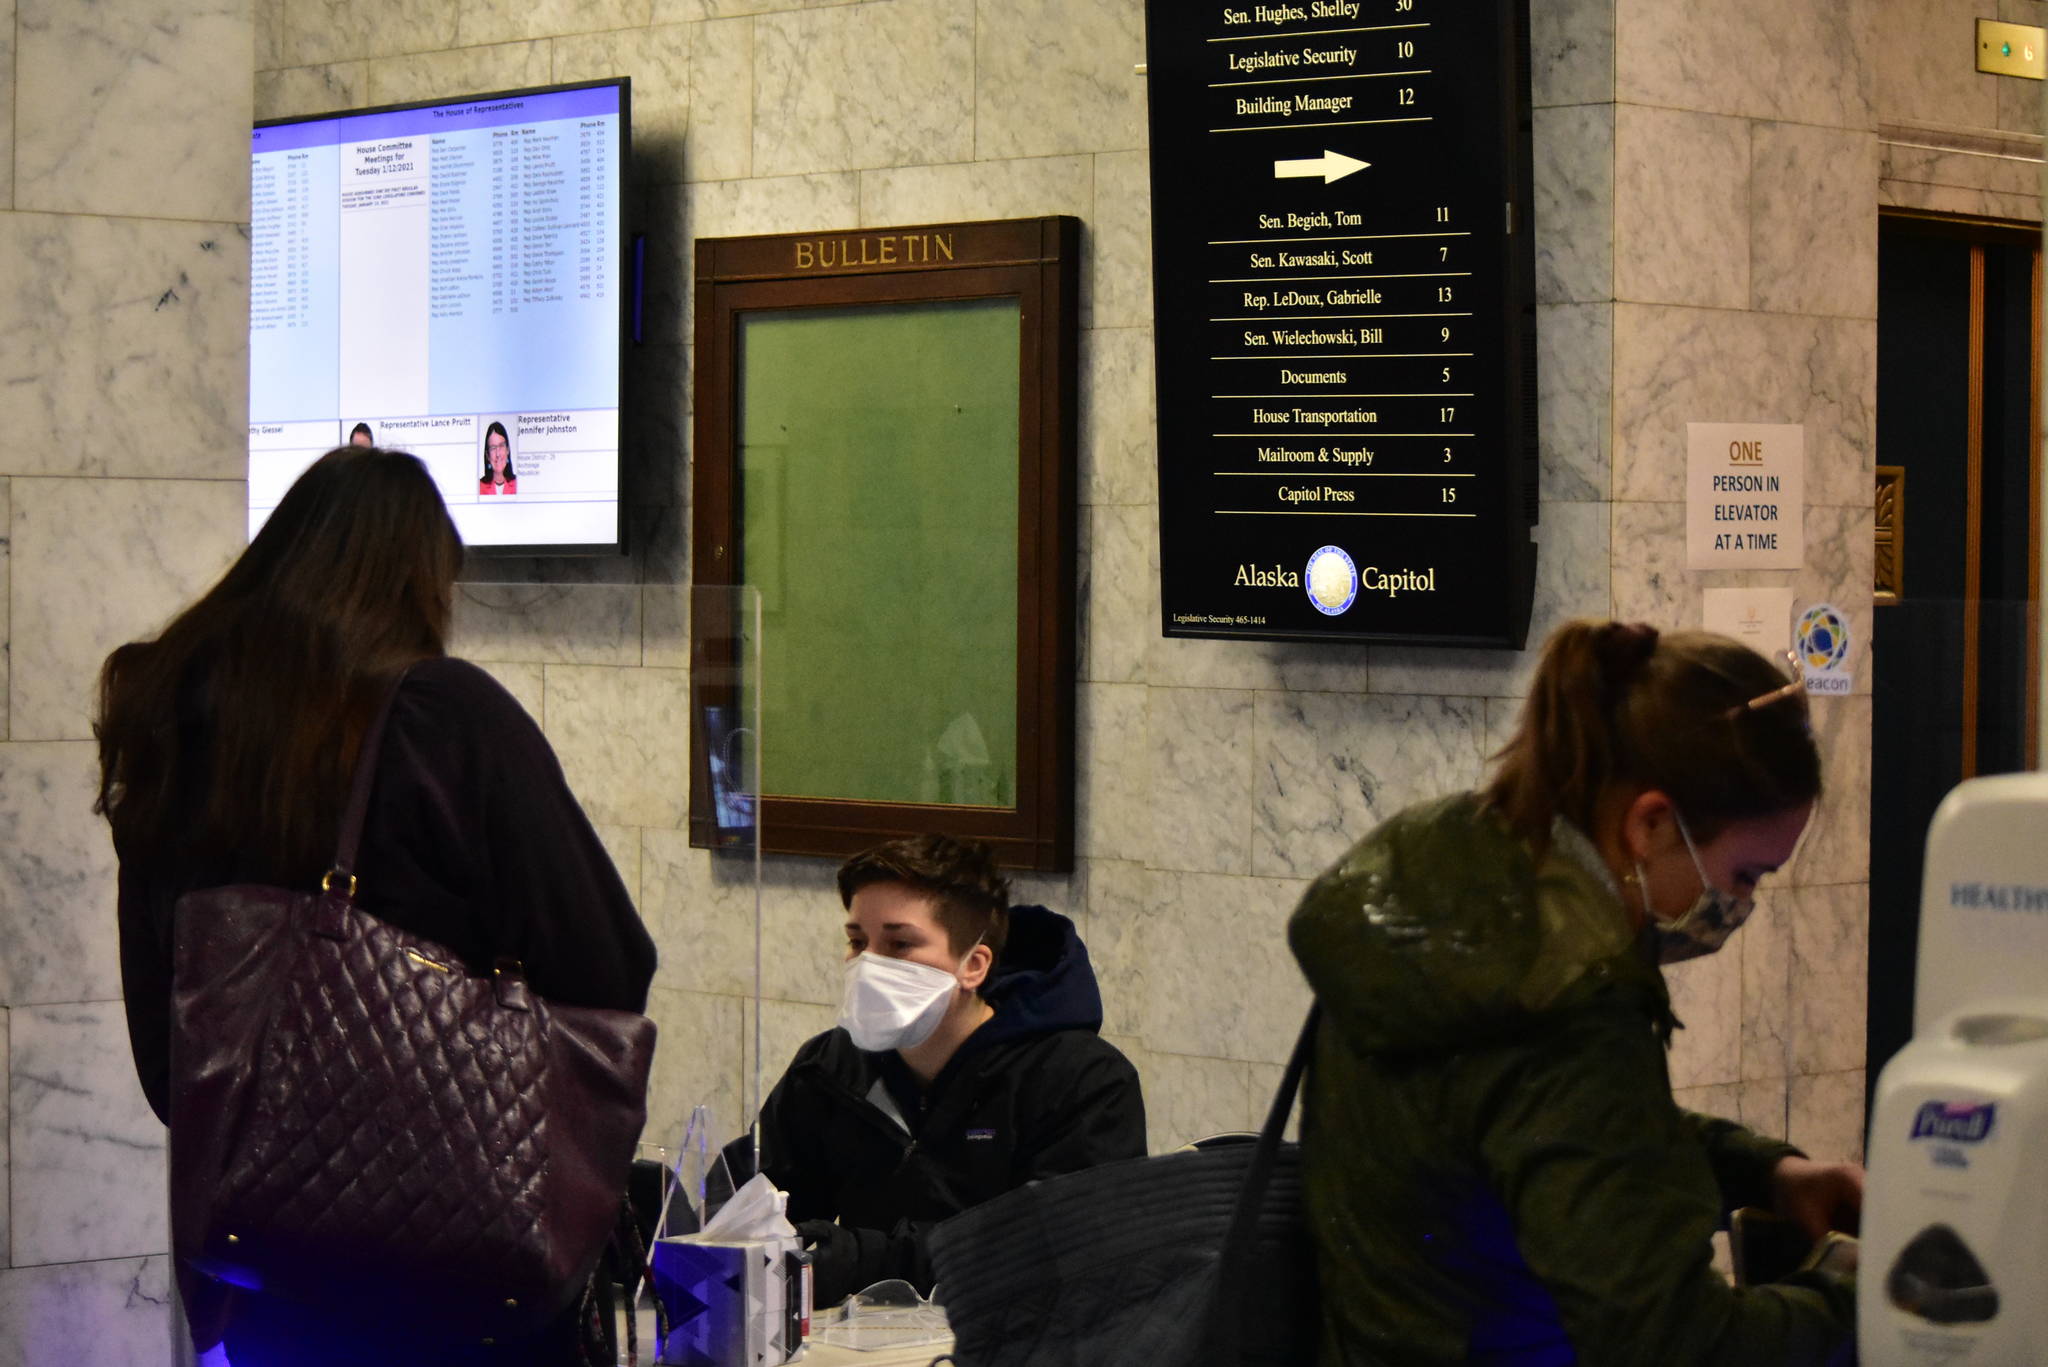 Staff pass through a COVID-19 screening checkpoint set up on the ground floor of the Alaska State Capitol on Tuesday. The new session of the Legislature starts Jan. 19, and some lawmakers and their staff have already arrived in Juneau. (Peter Segall / Juneau Empire)